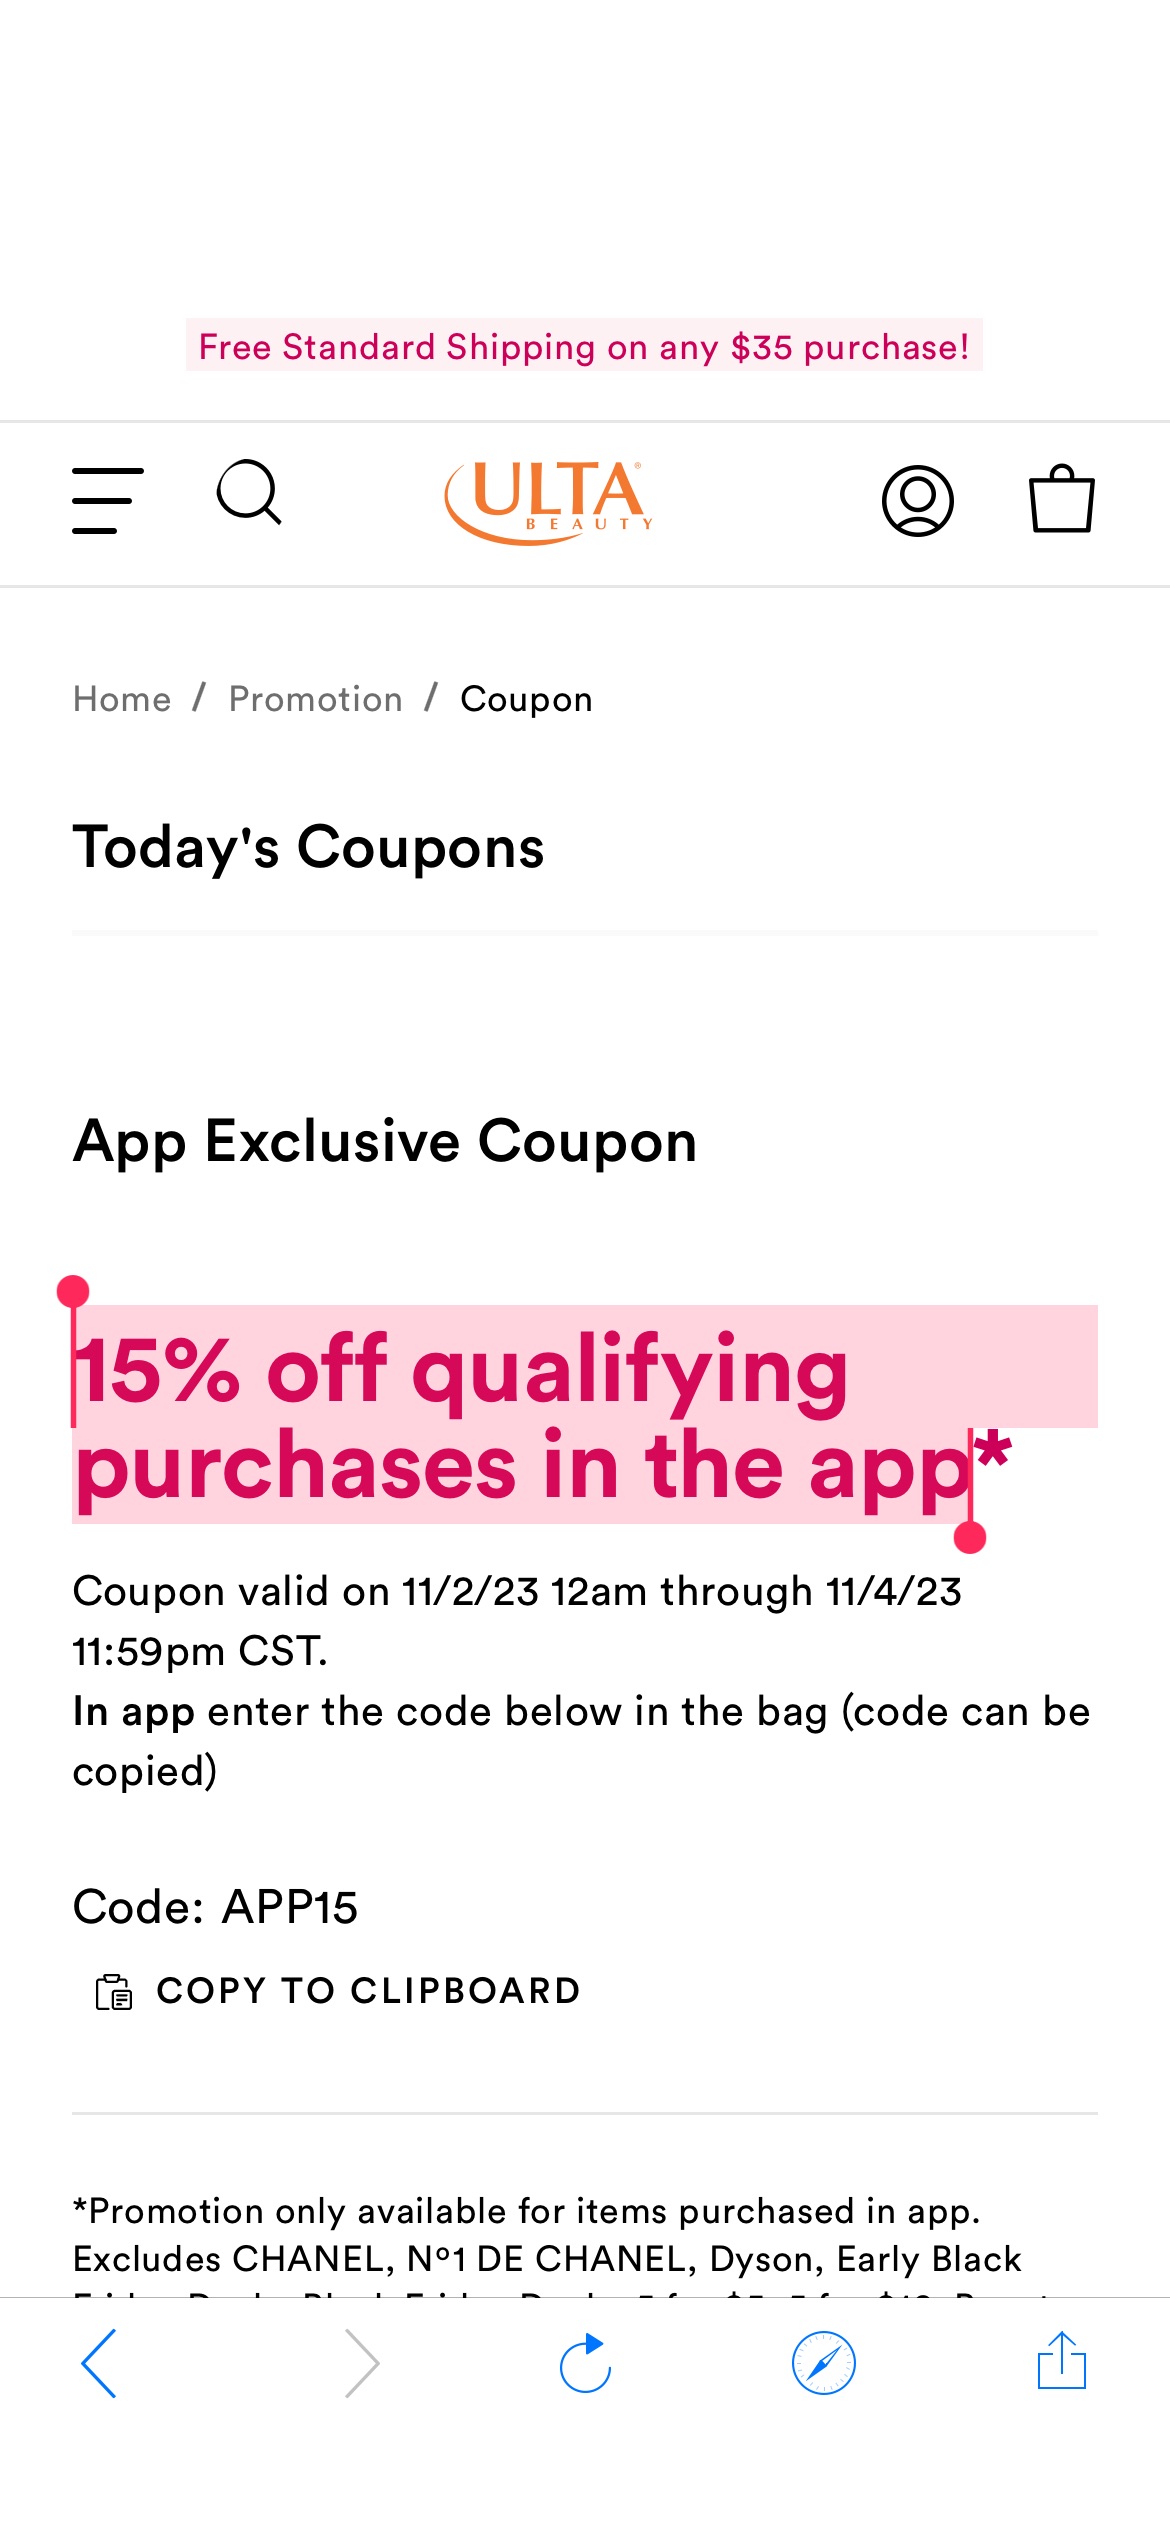 15% off qualifying purchases in the app. ulta软件有15%off